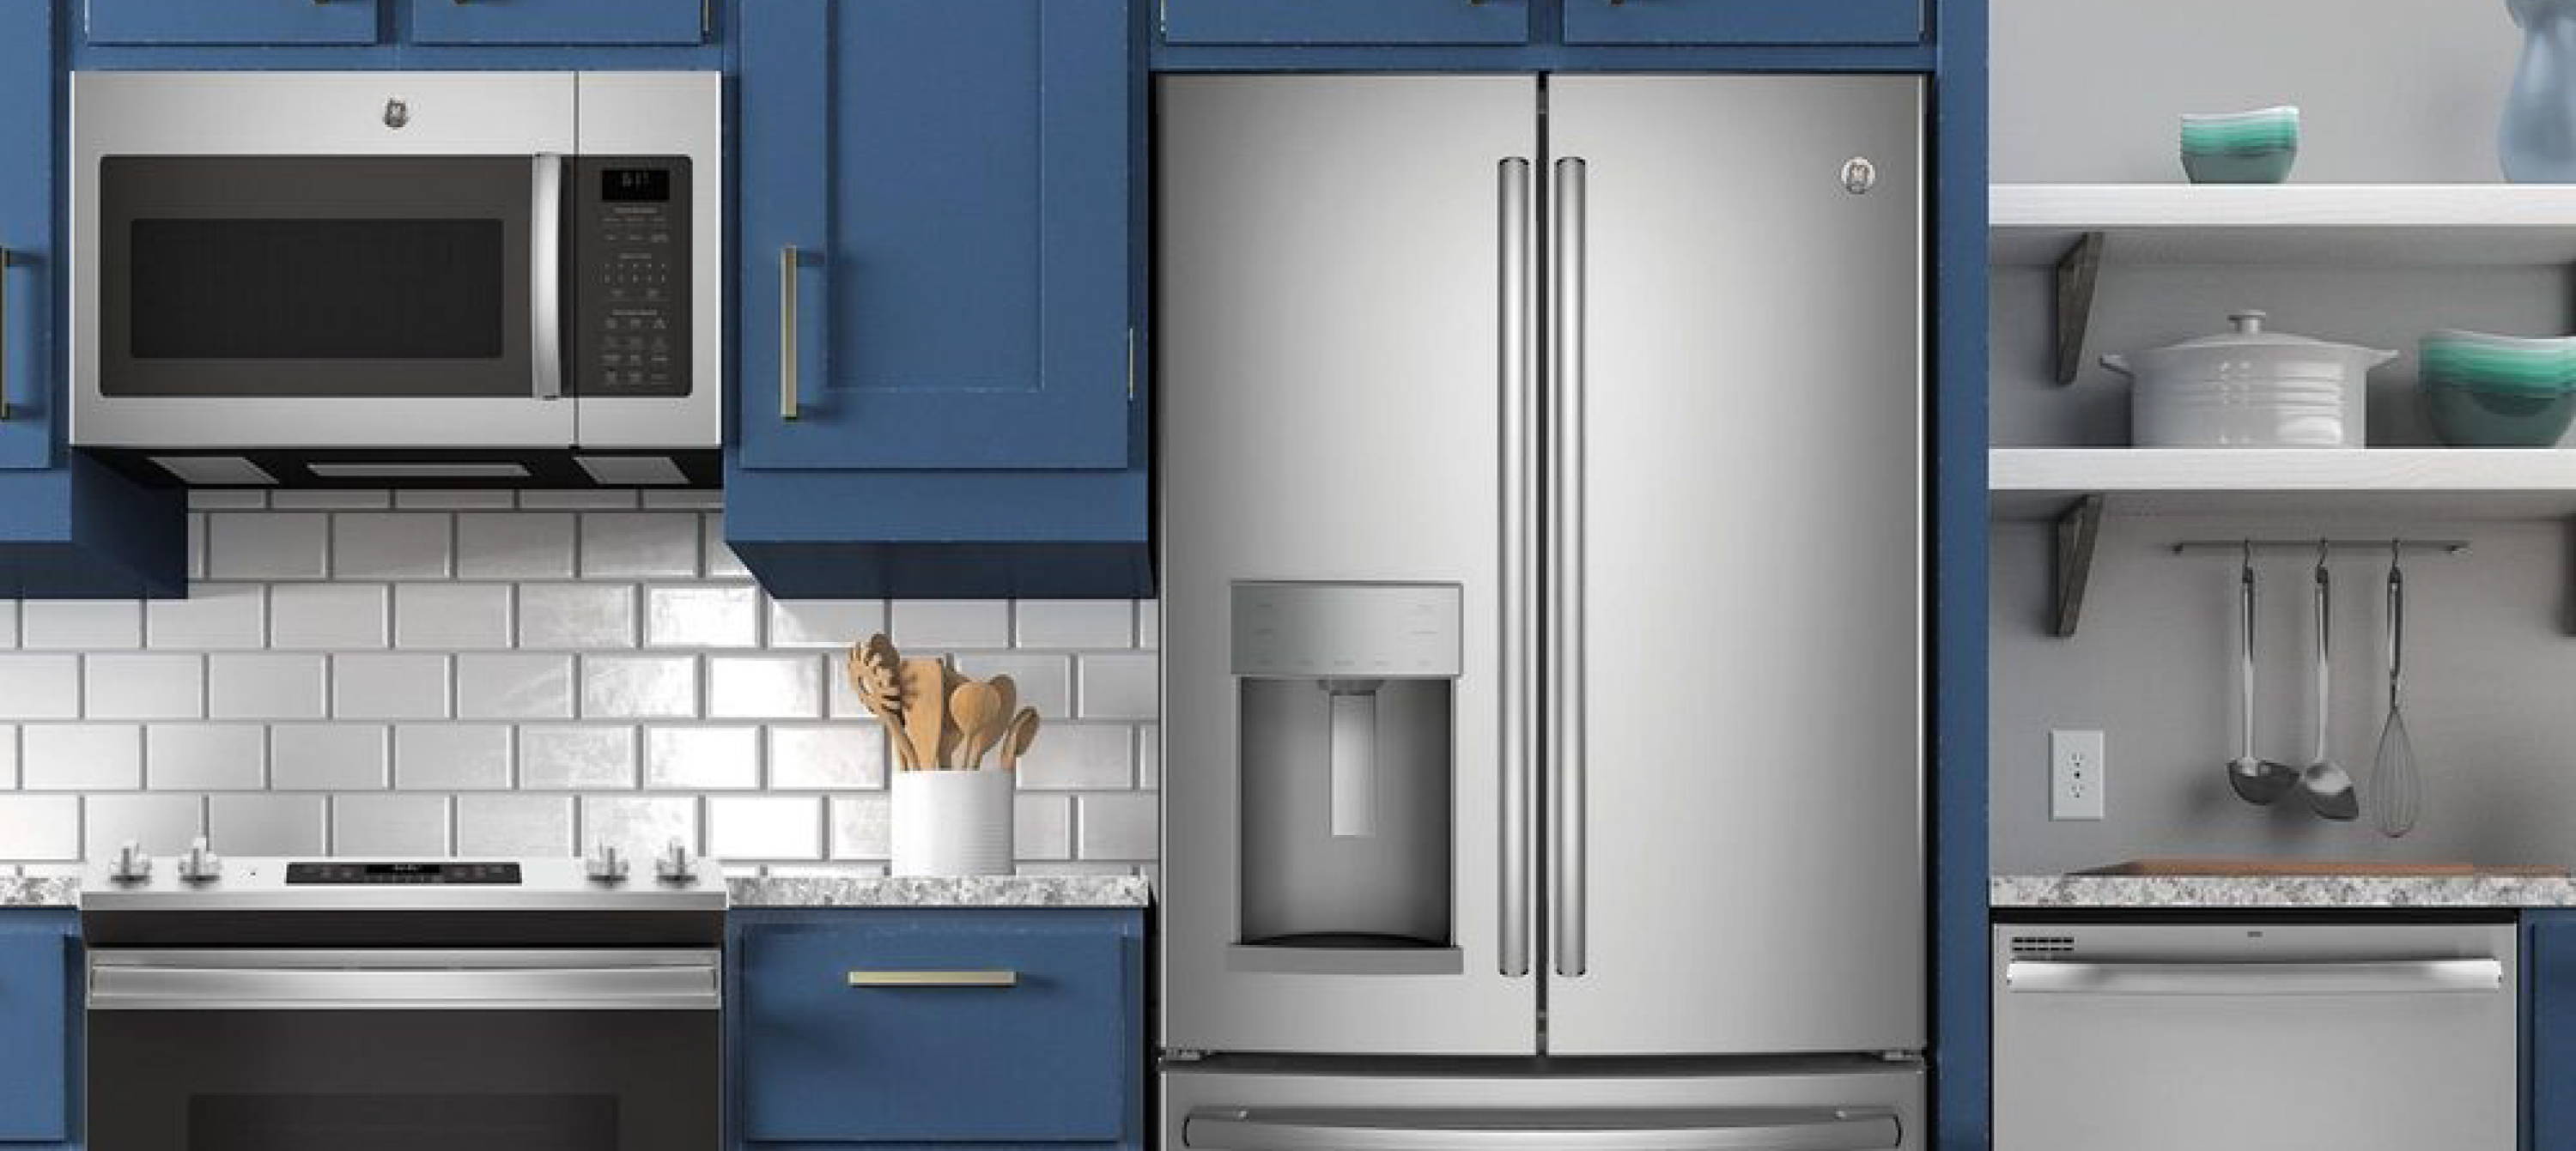 Kitchen scene featuring a range, microwave, refrigerator, and dishwasher. Click the "Shop Appliances" button to be directed to our in-stock appliances collection.